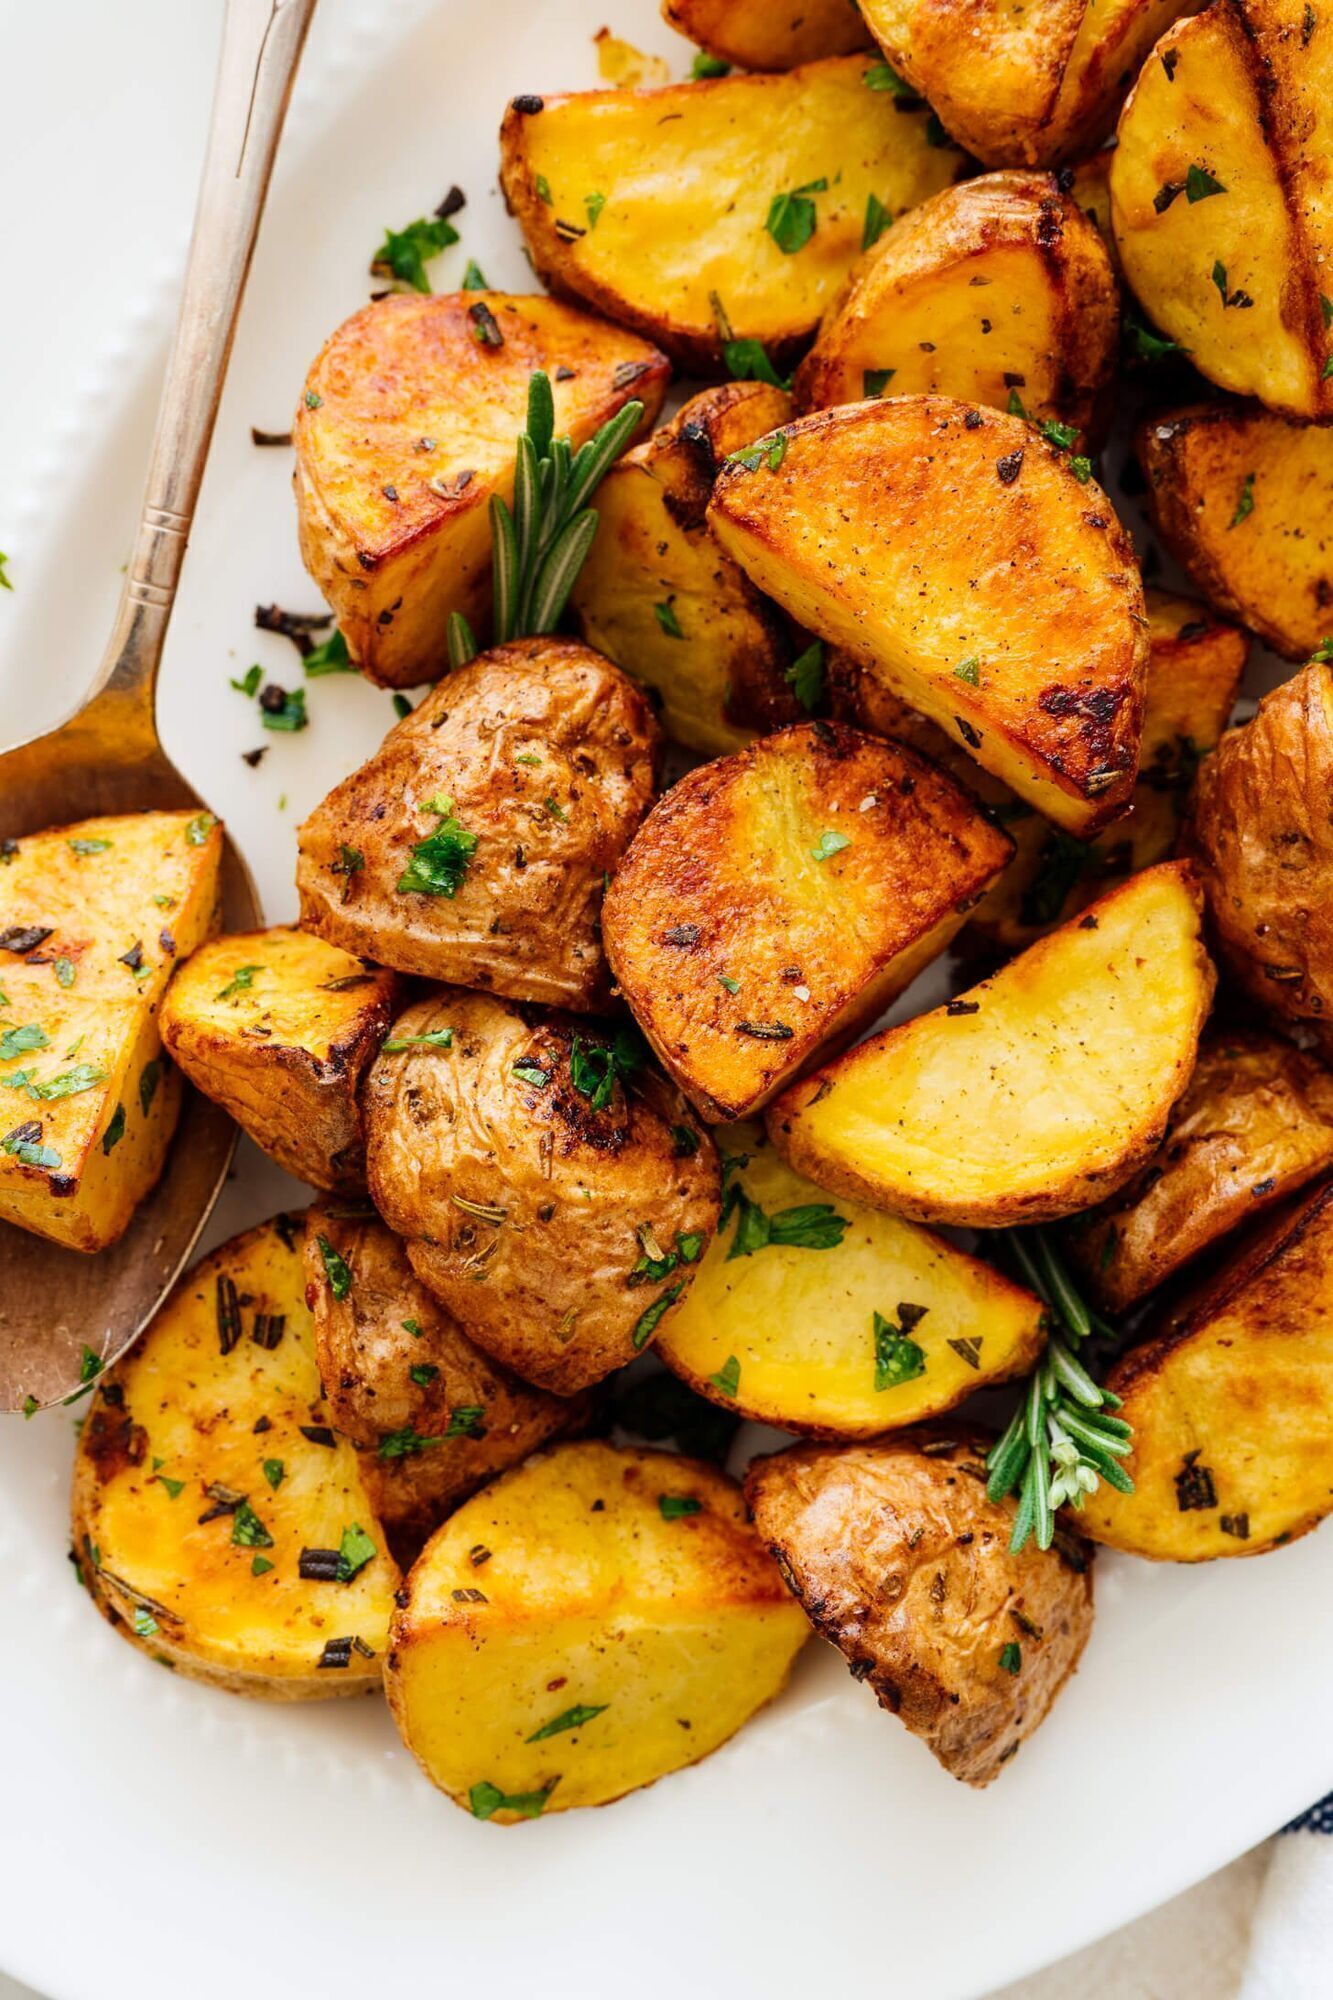 How to cook potatoes deliciously in the oven